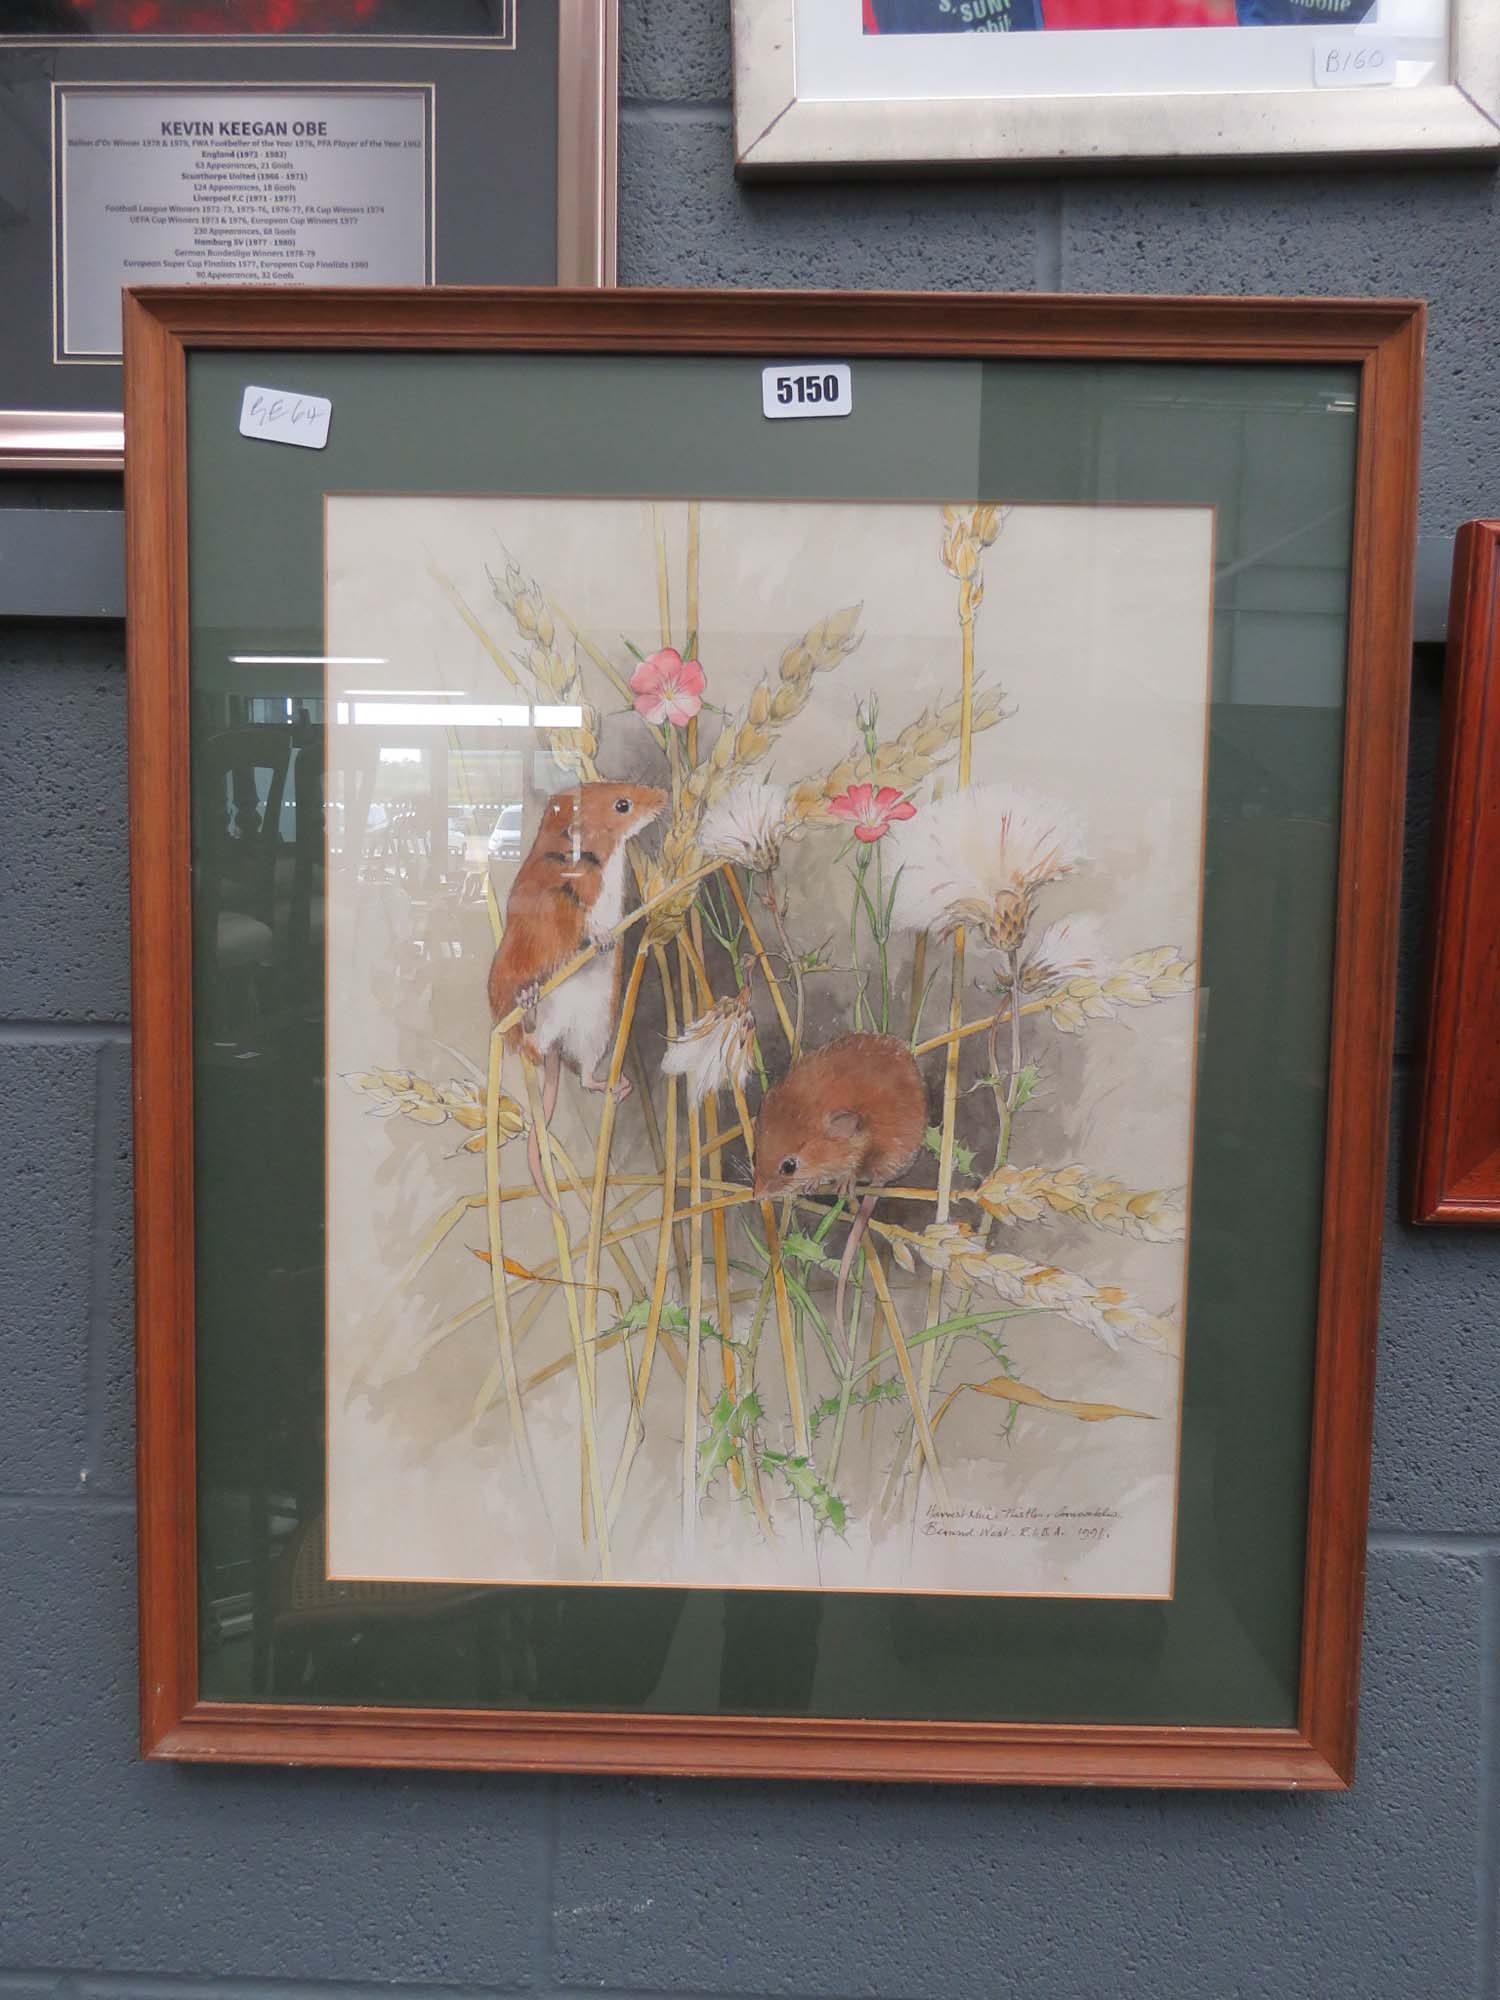 Framed and glazed picture of harvest mice